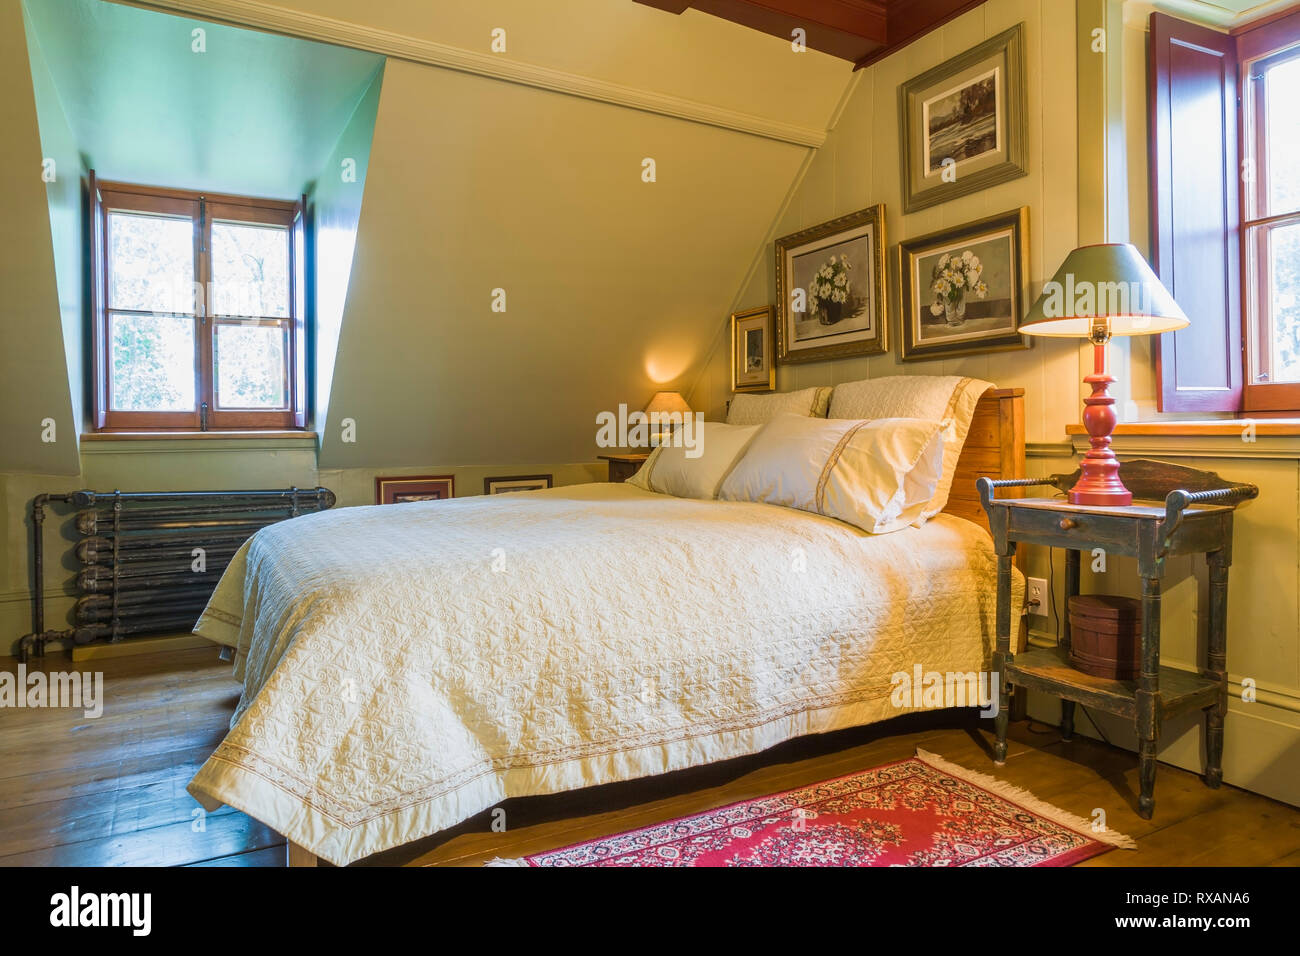 Queen size bed with antique wooden headboard, bedside table and framed paintings in upstairs master bedroom inside an old circa 1805 Canadiana cottage style home, Quebec, Canada. This image is property released. CUPR0323 Stock Photo